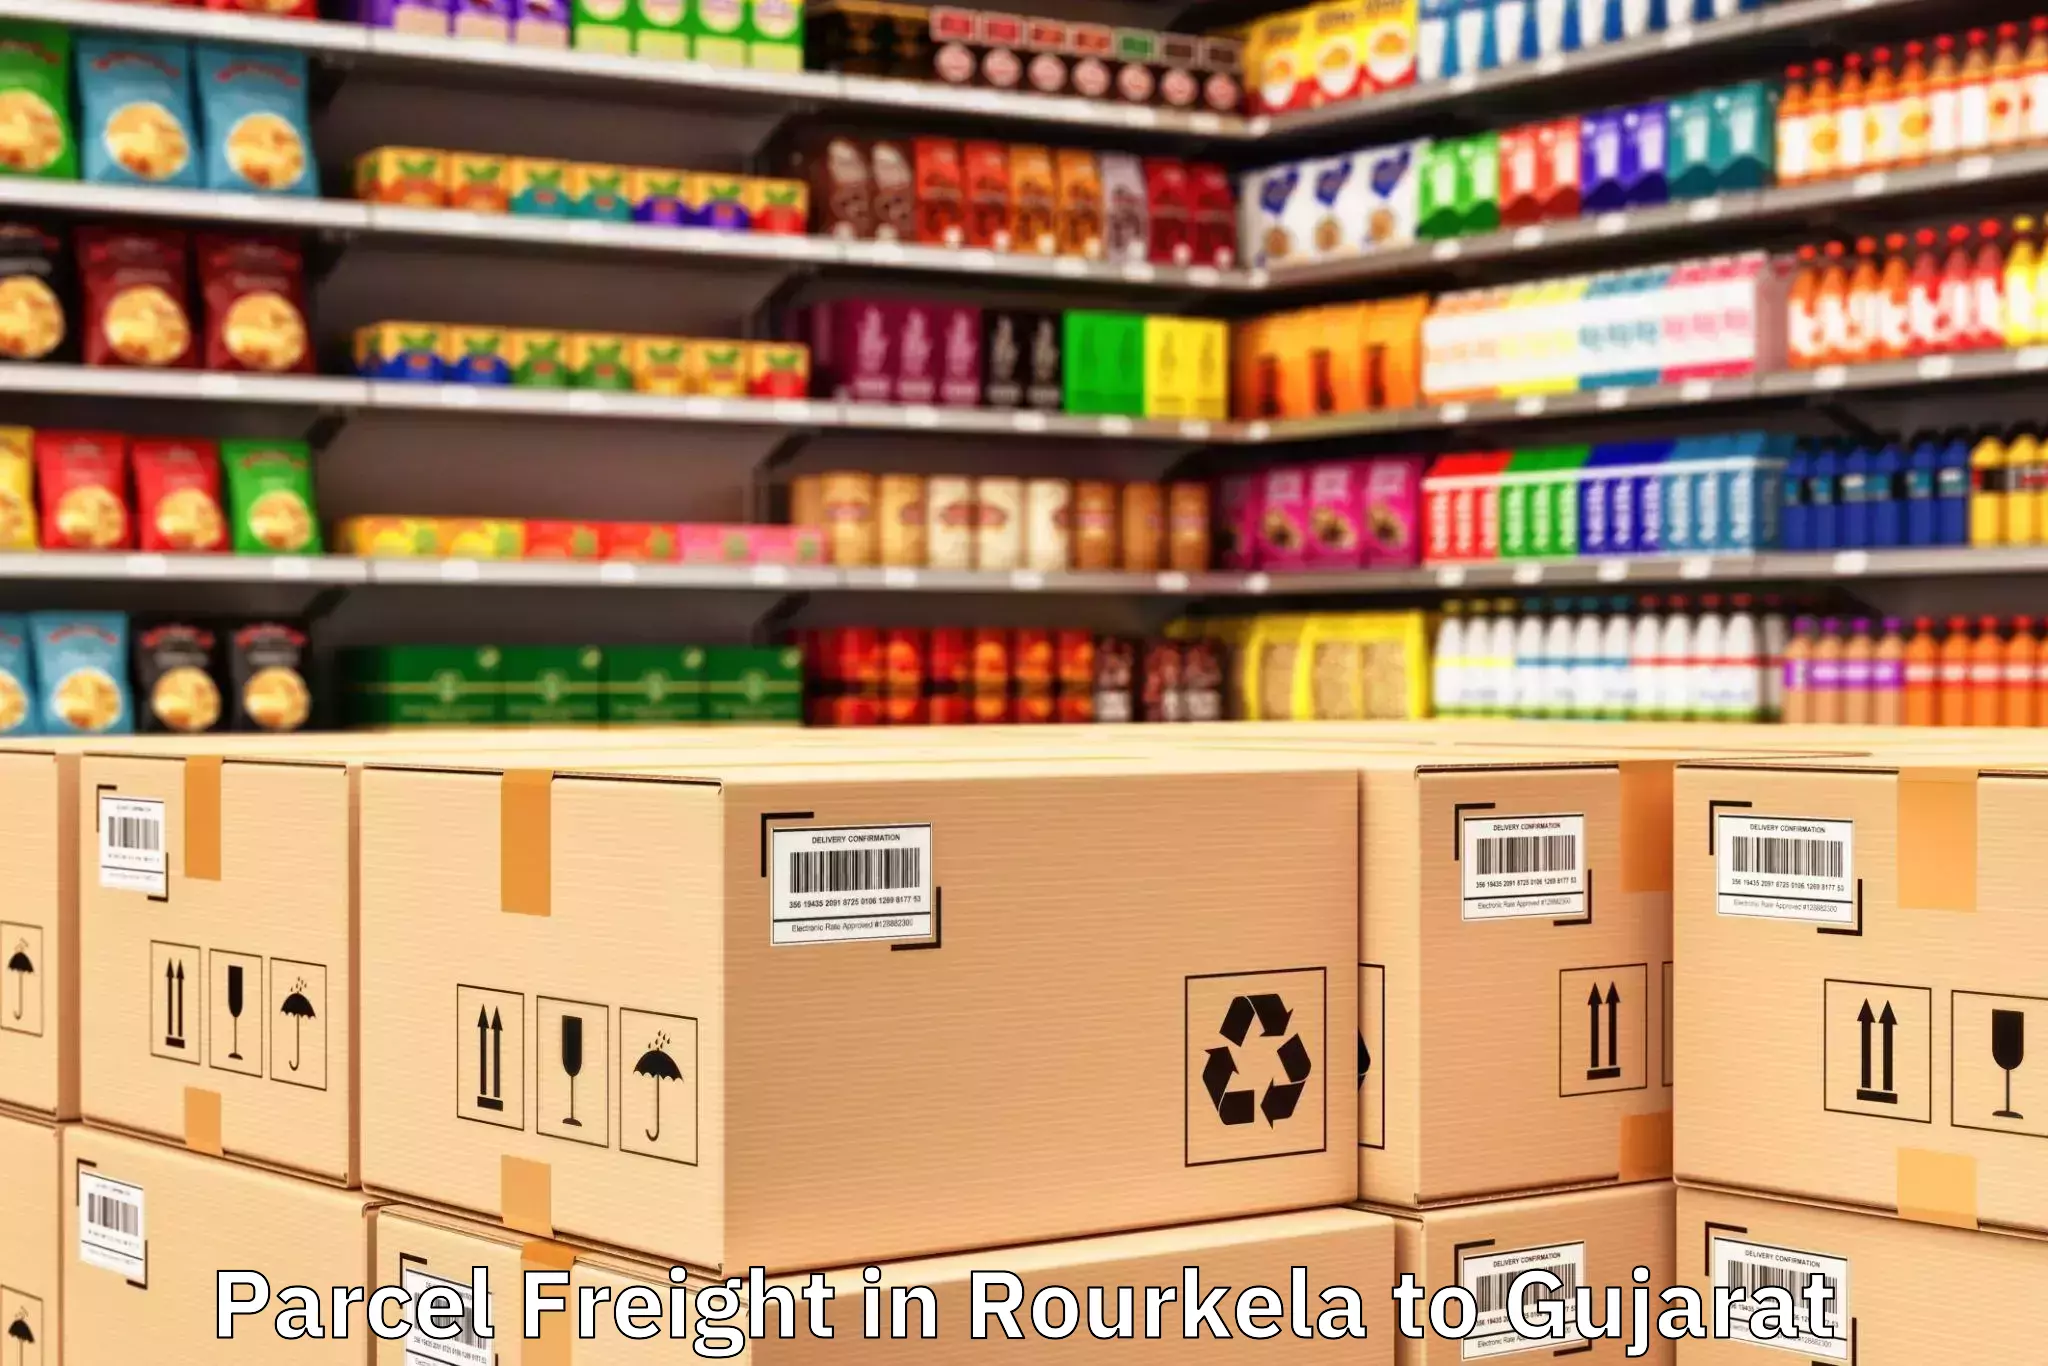 Professional Rourkela to Bharuch Parcel Freight